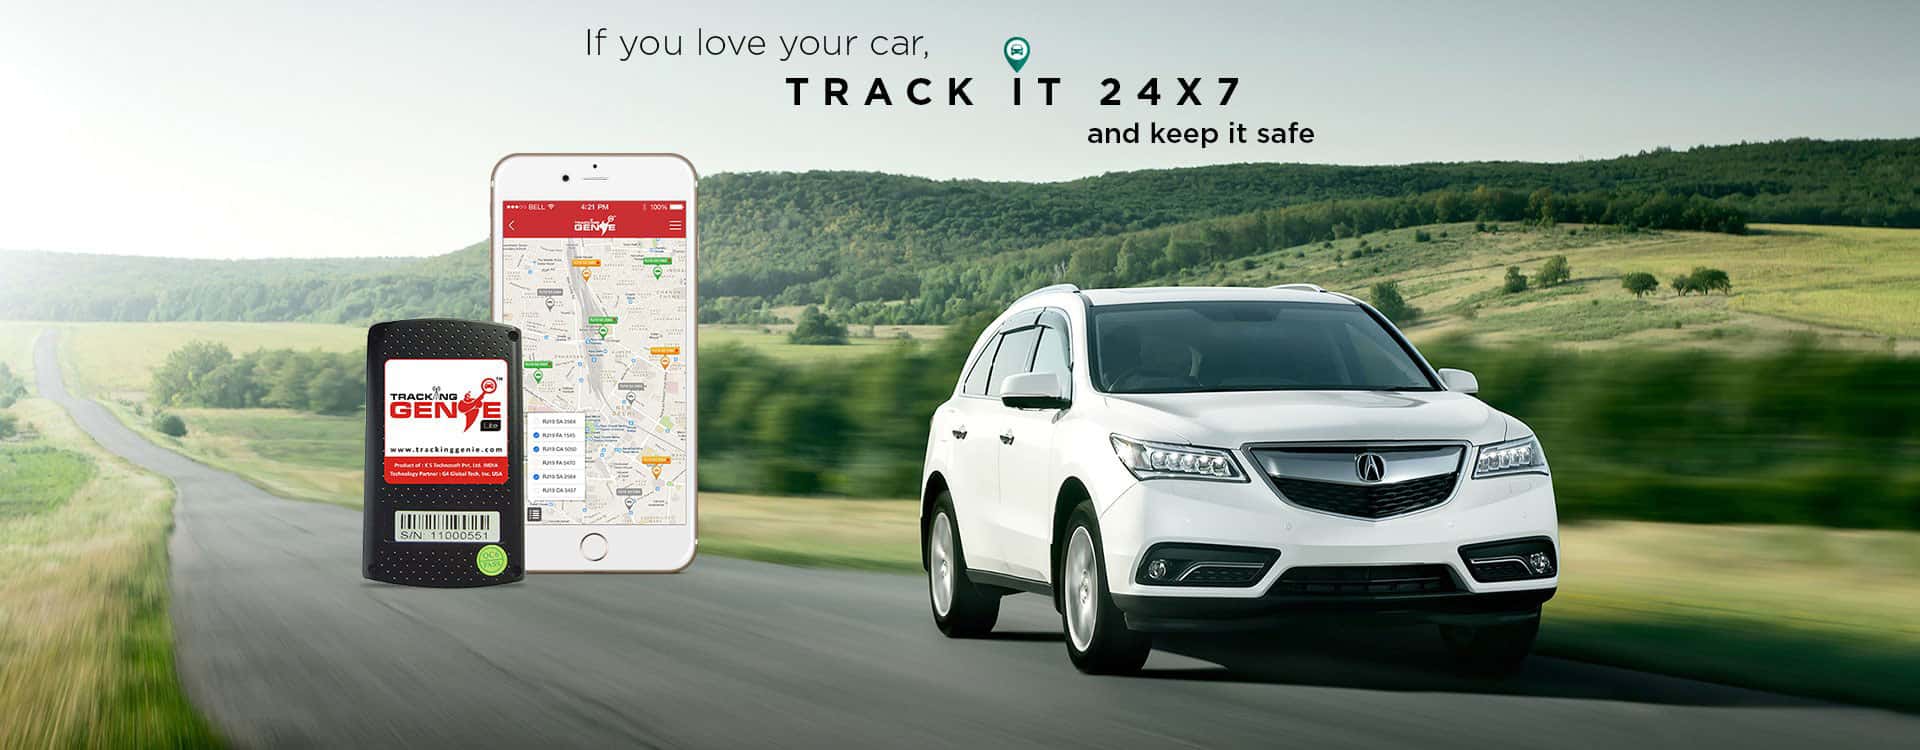 Car Tracking System